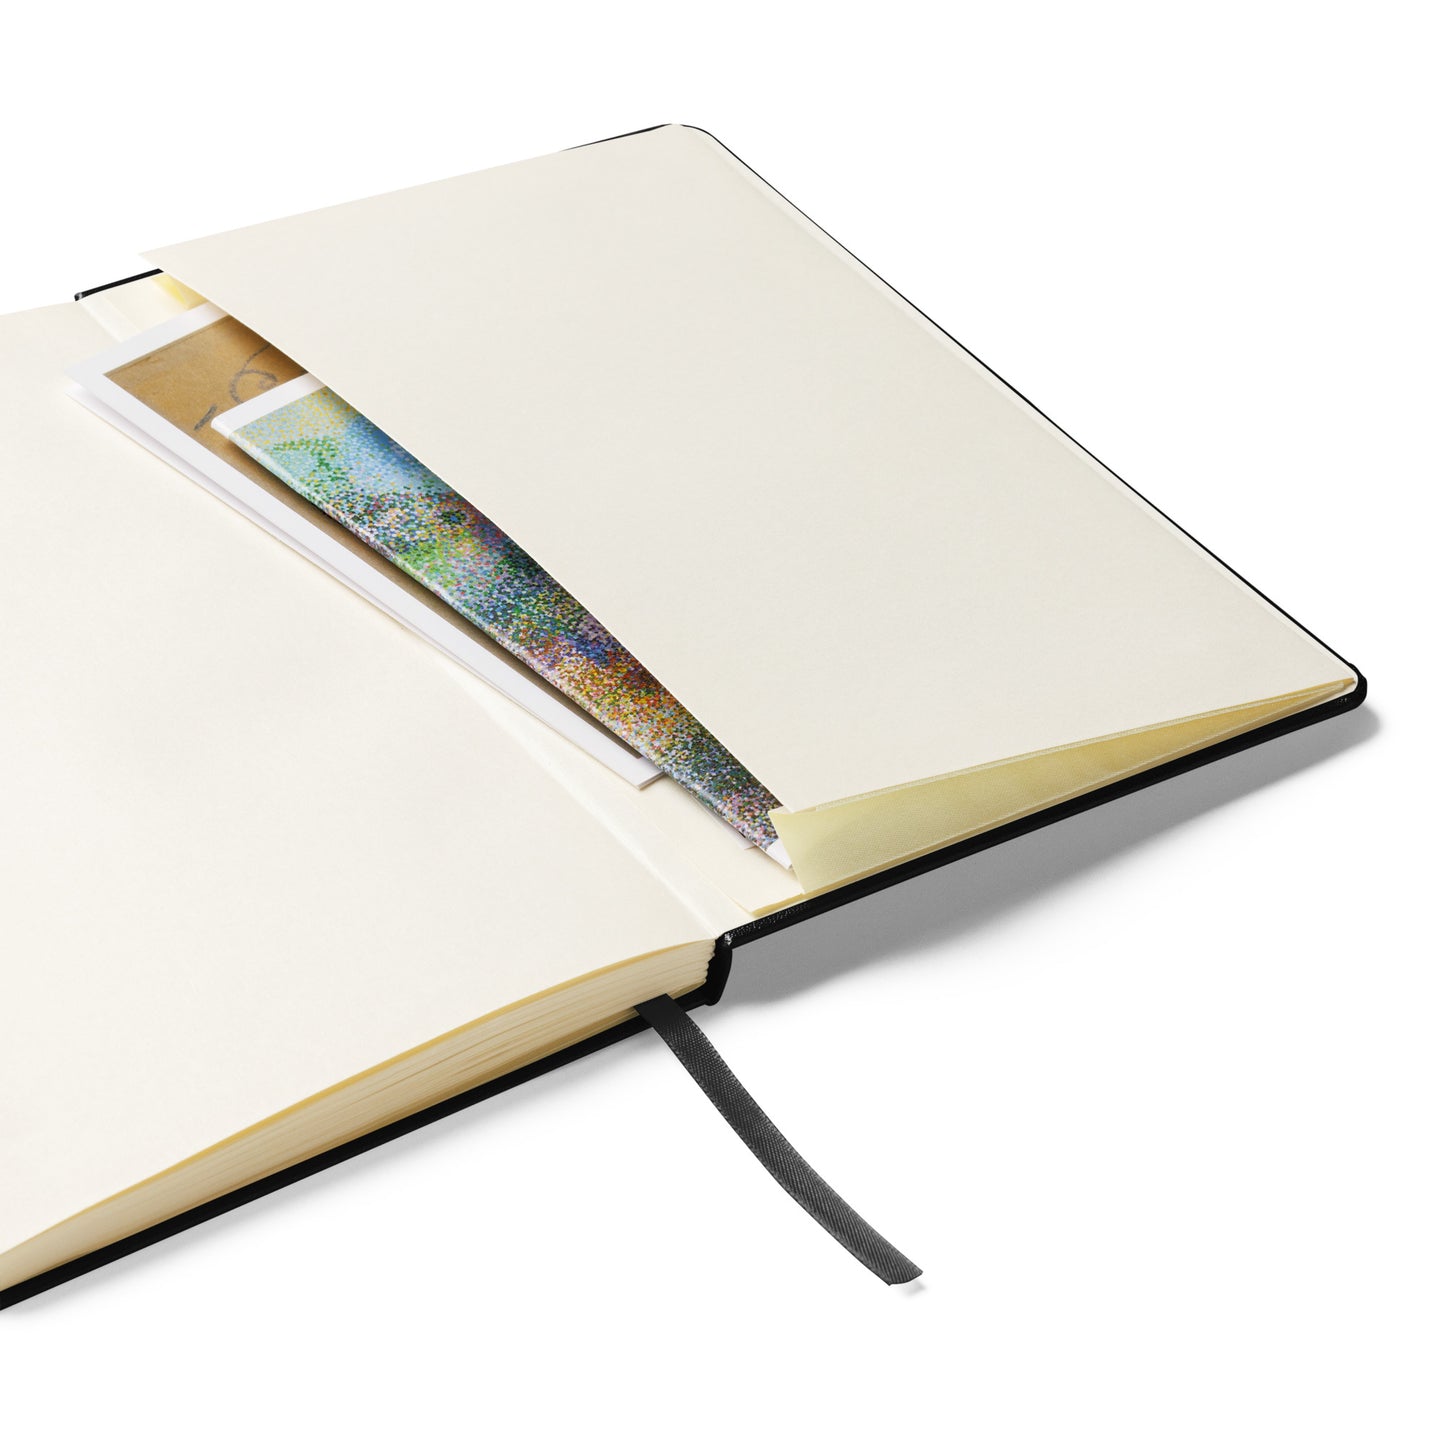 “May your wishes come true!” - Hardcover bound notebook